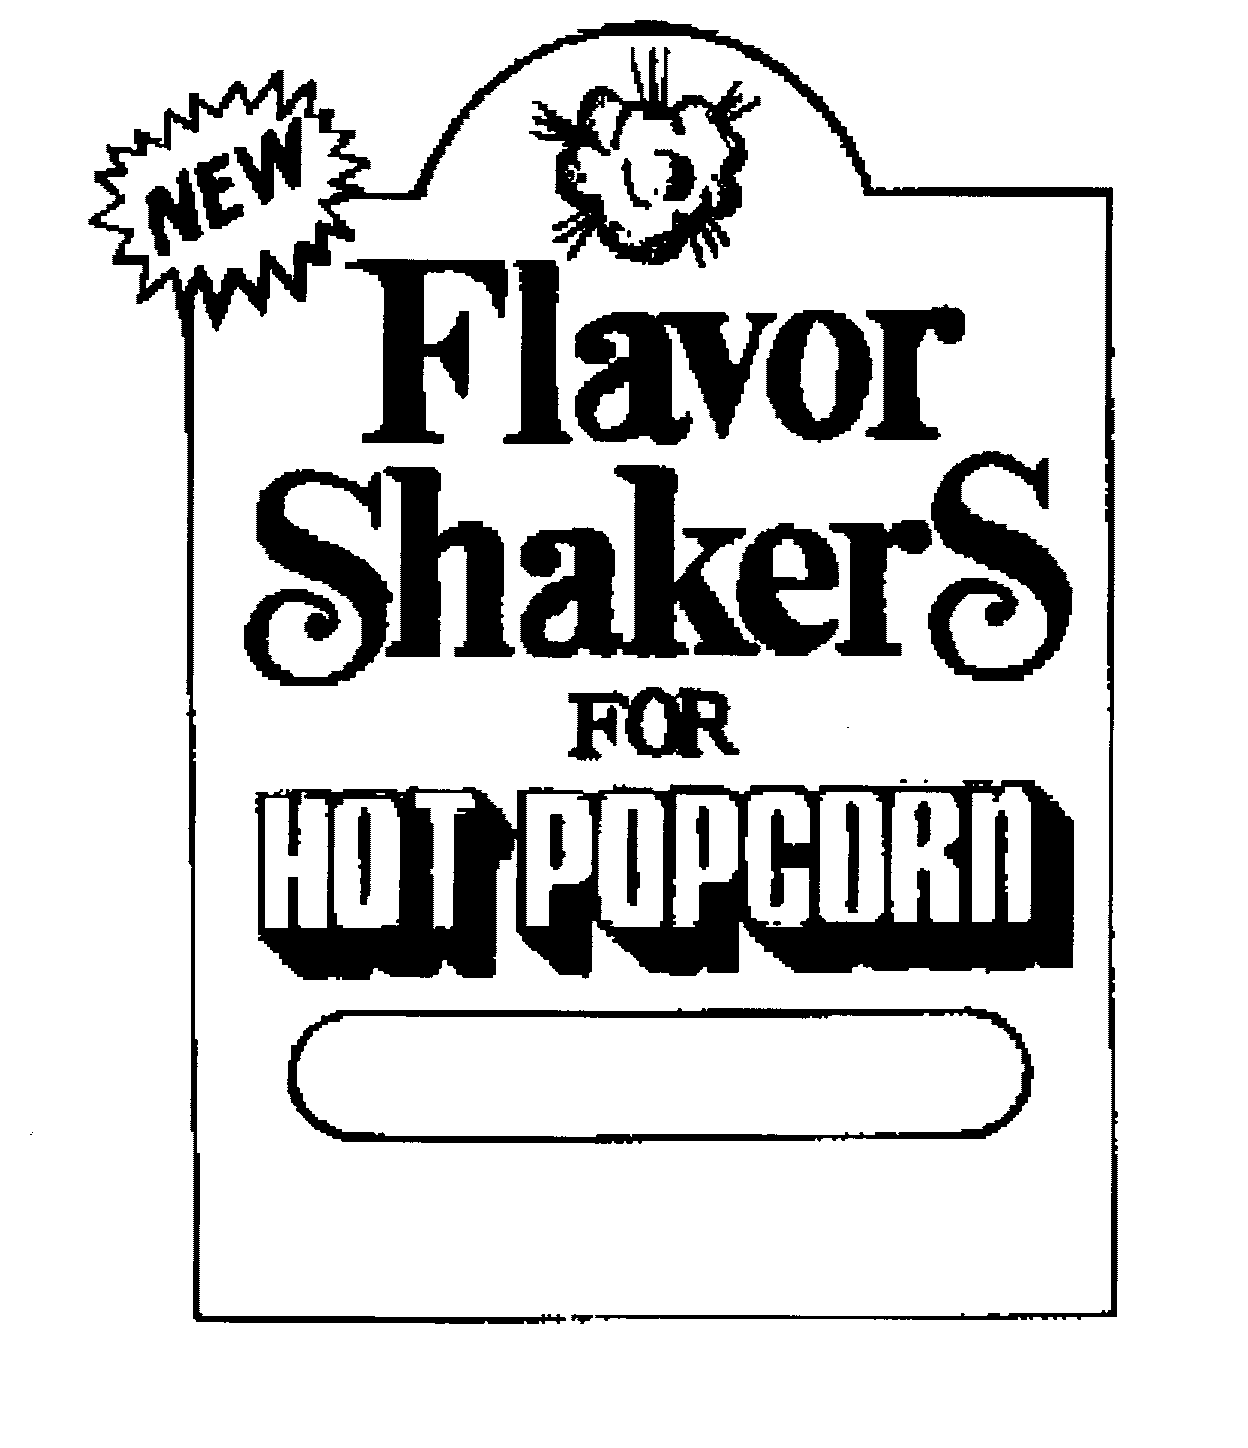  NEW FLAVOR SHAKERS FOR HOT POPCORN